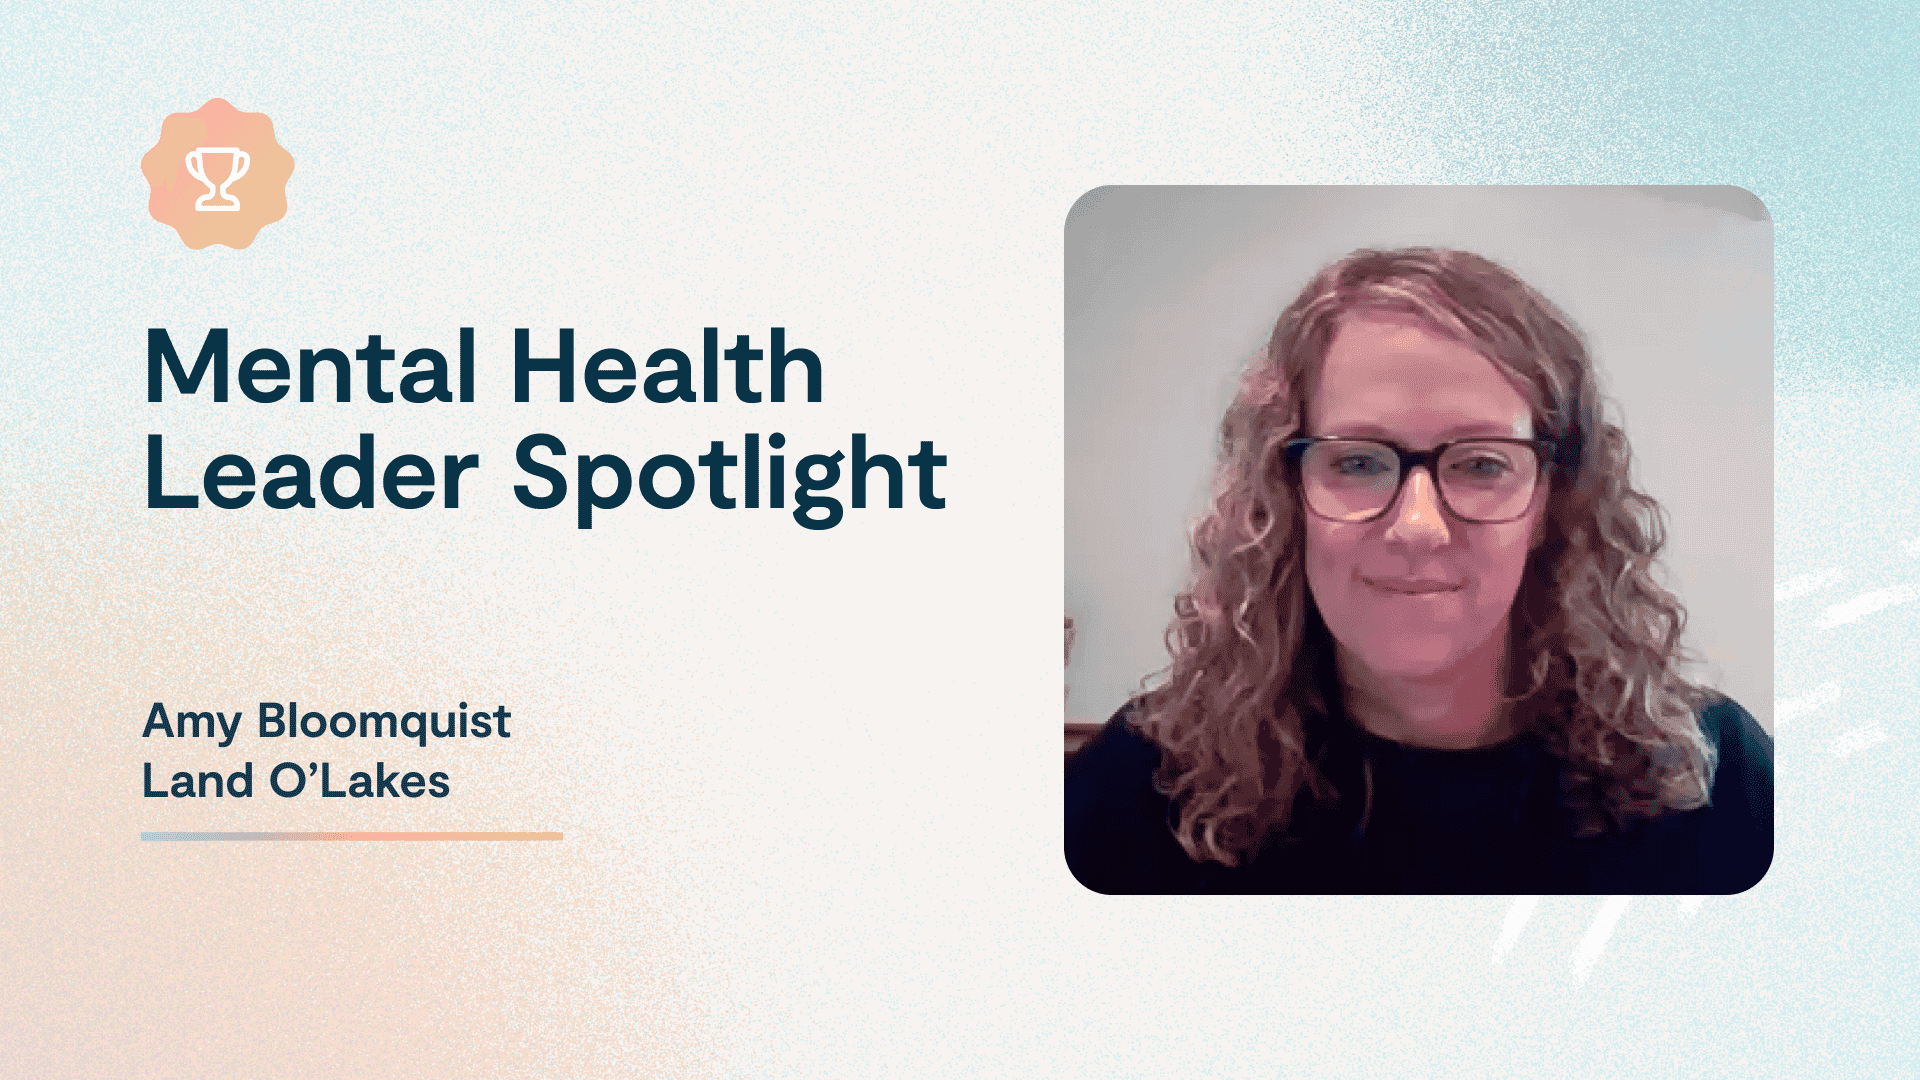 Mental Health Leader Spotlight: Amy Bloomquist from Land O’Lakes